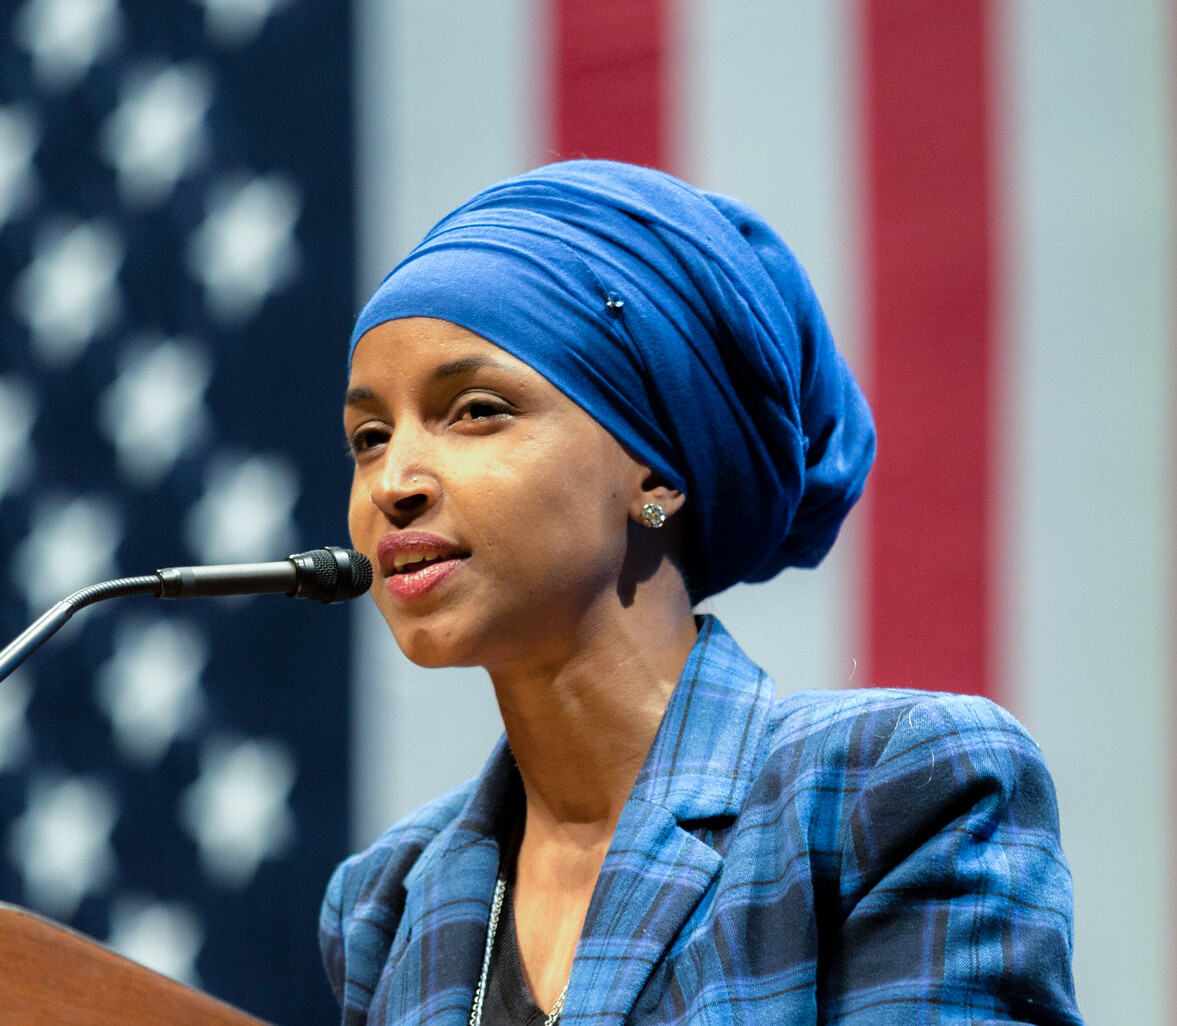 Report: Ilhan Omar Paid over $500,000 to Alleged Lover’s Firm